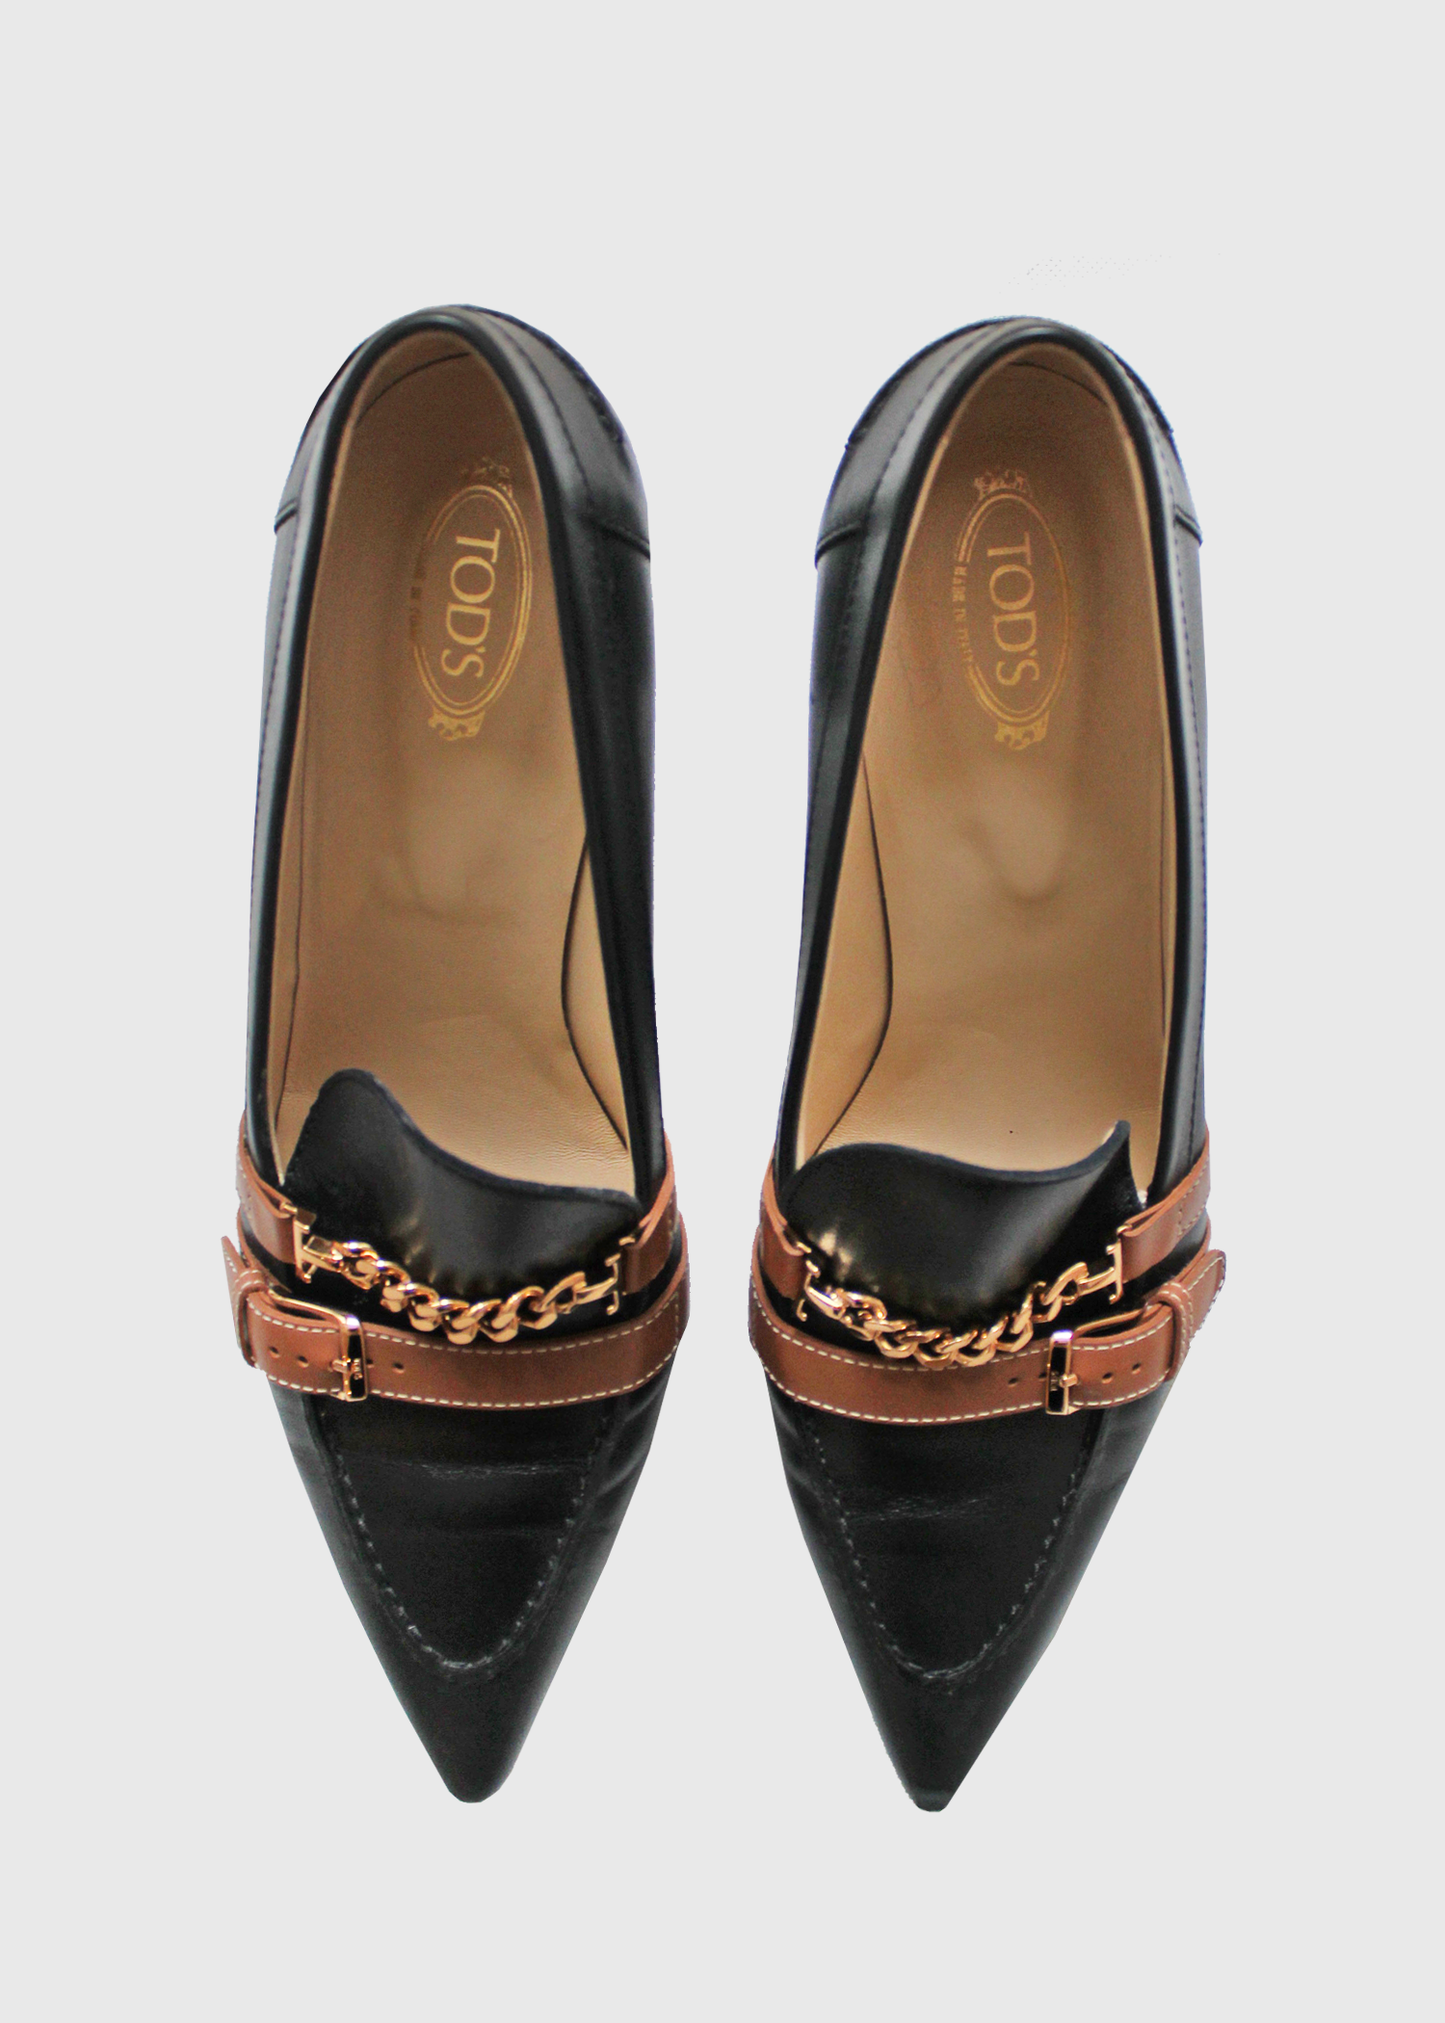 Tod's Black Leather Chain-Covered Pointed Loafers- Size EU40 / US9.5-10